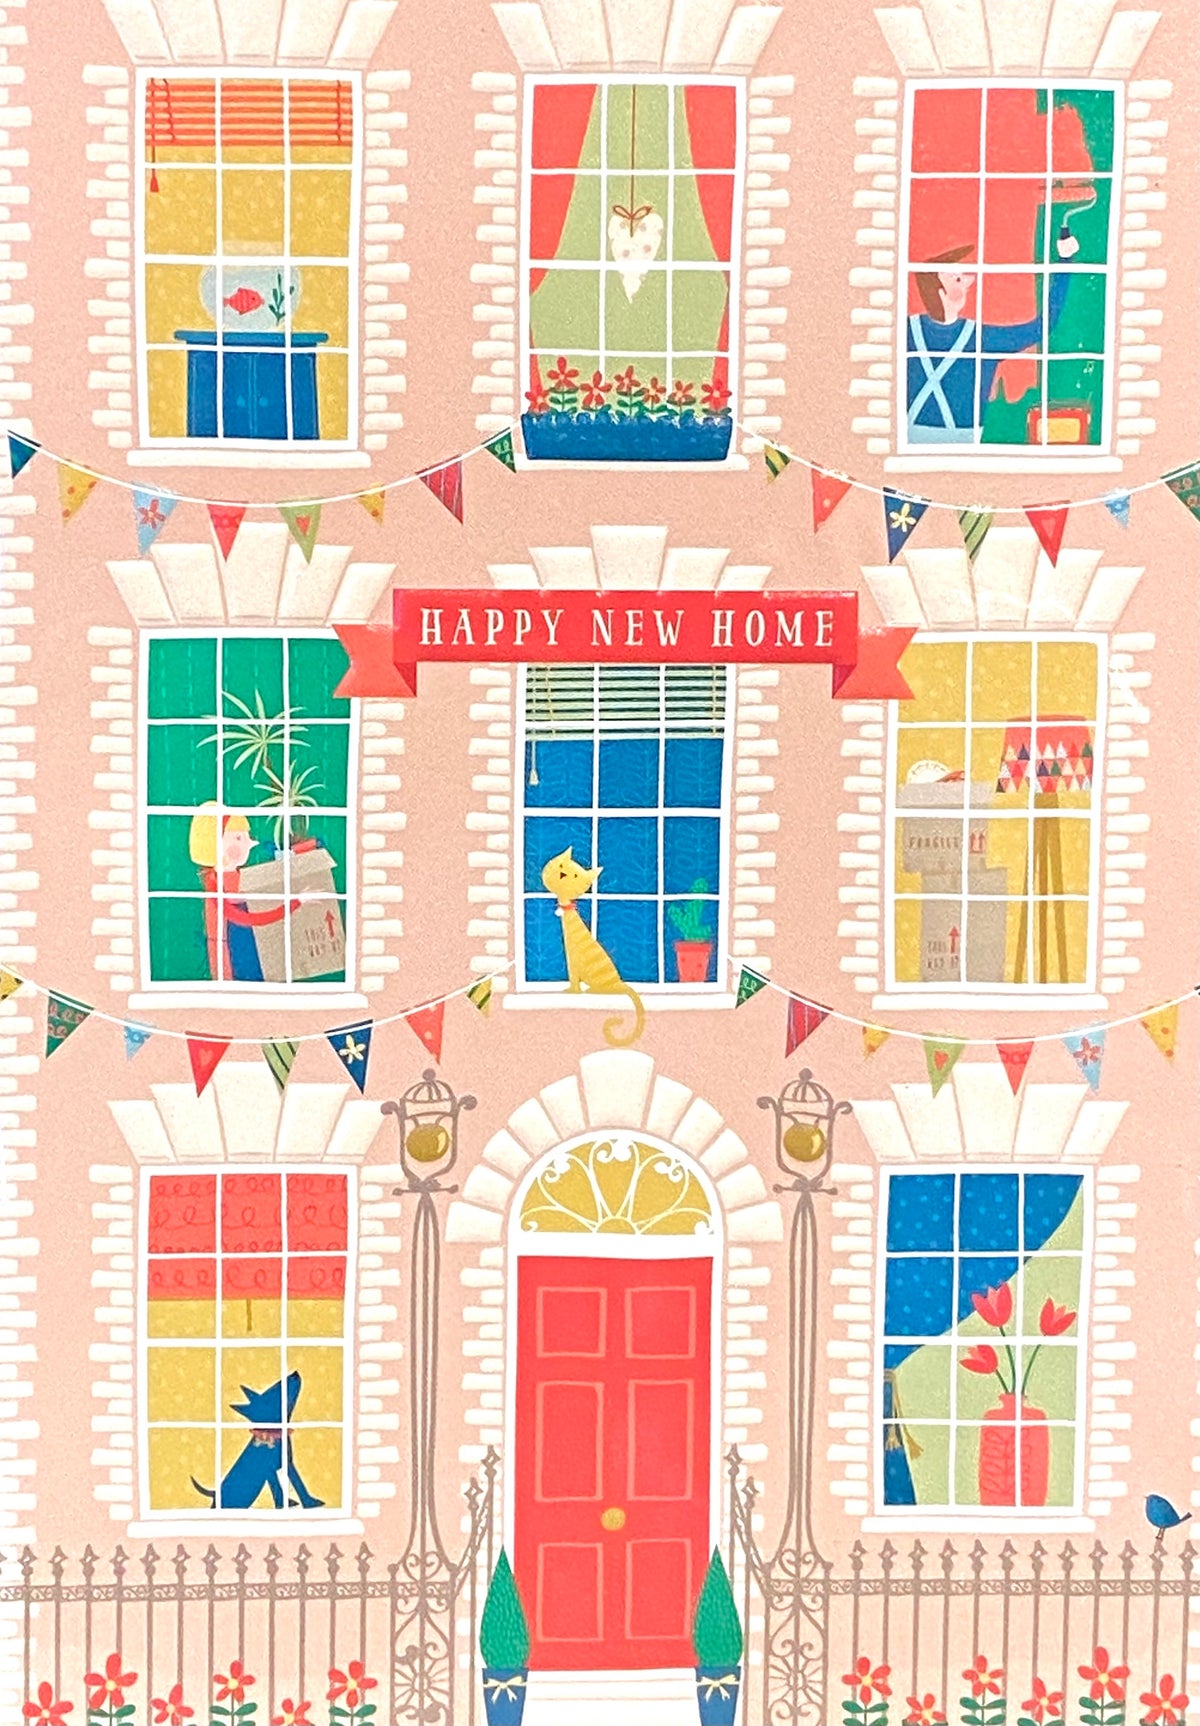 New Home Card- Happy New Home Pink House